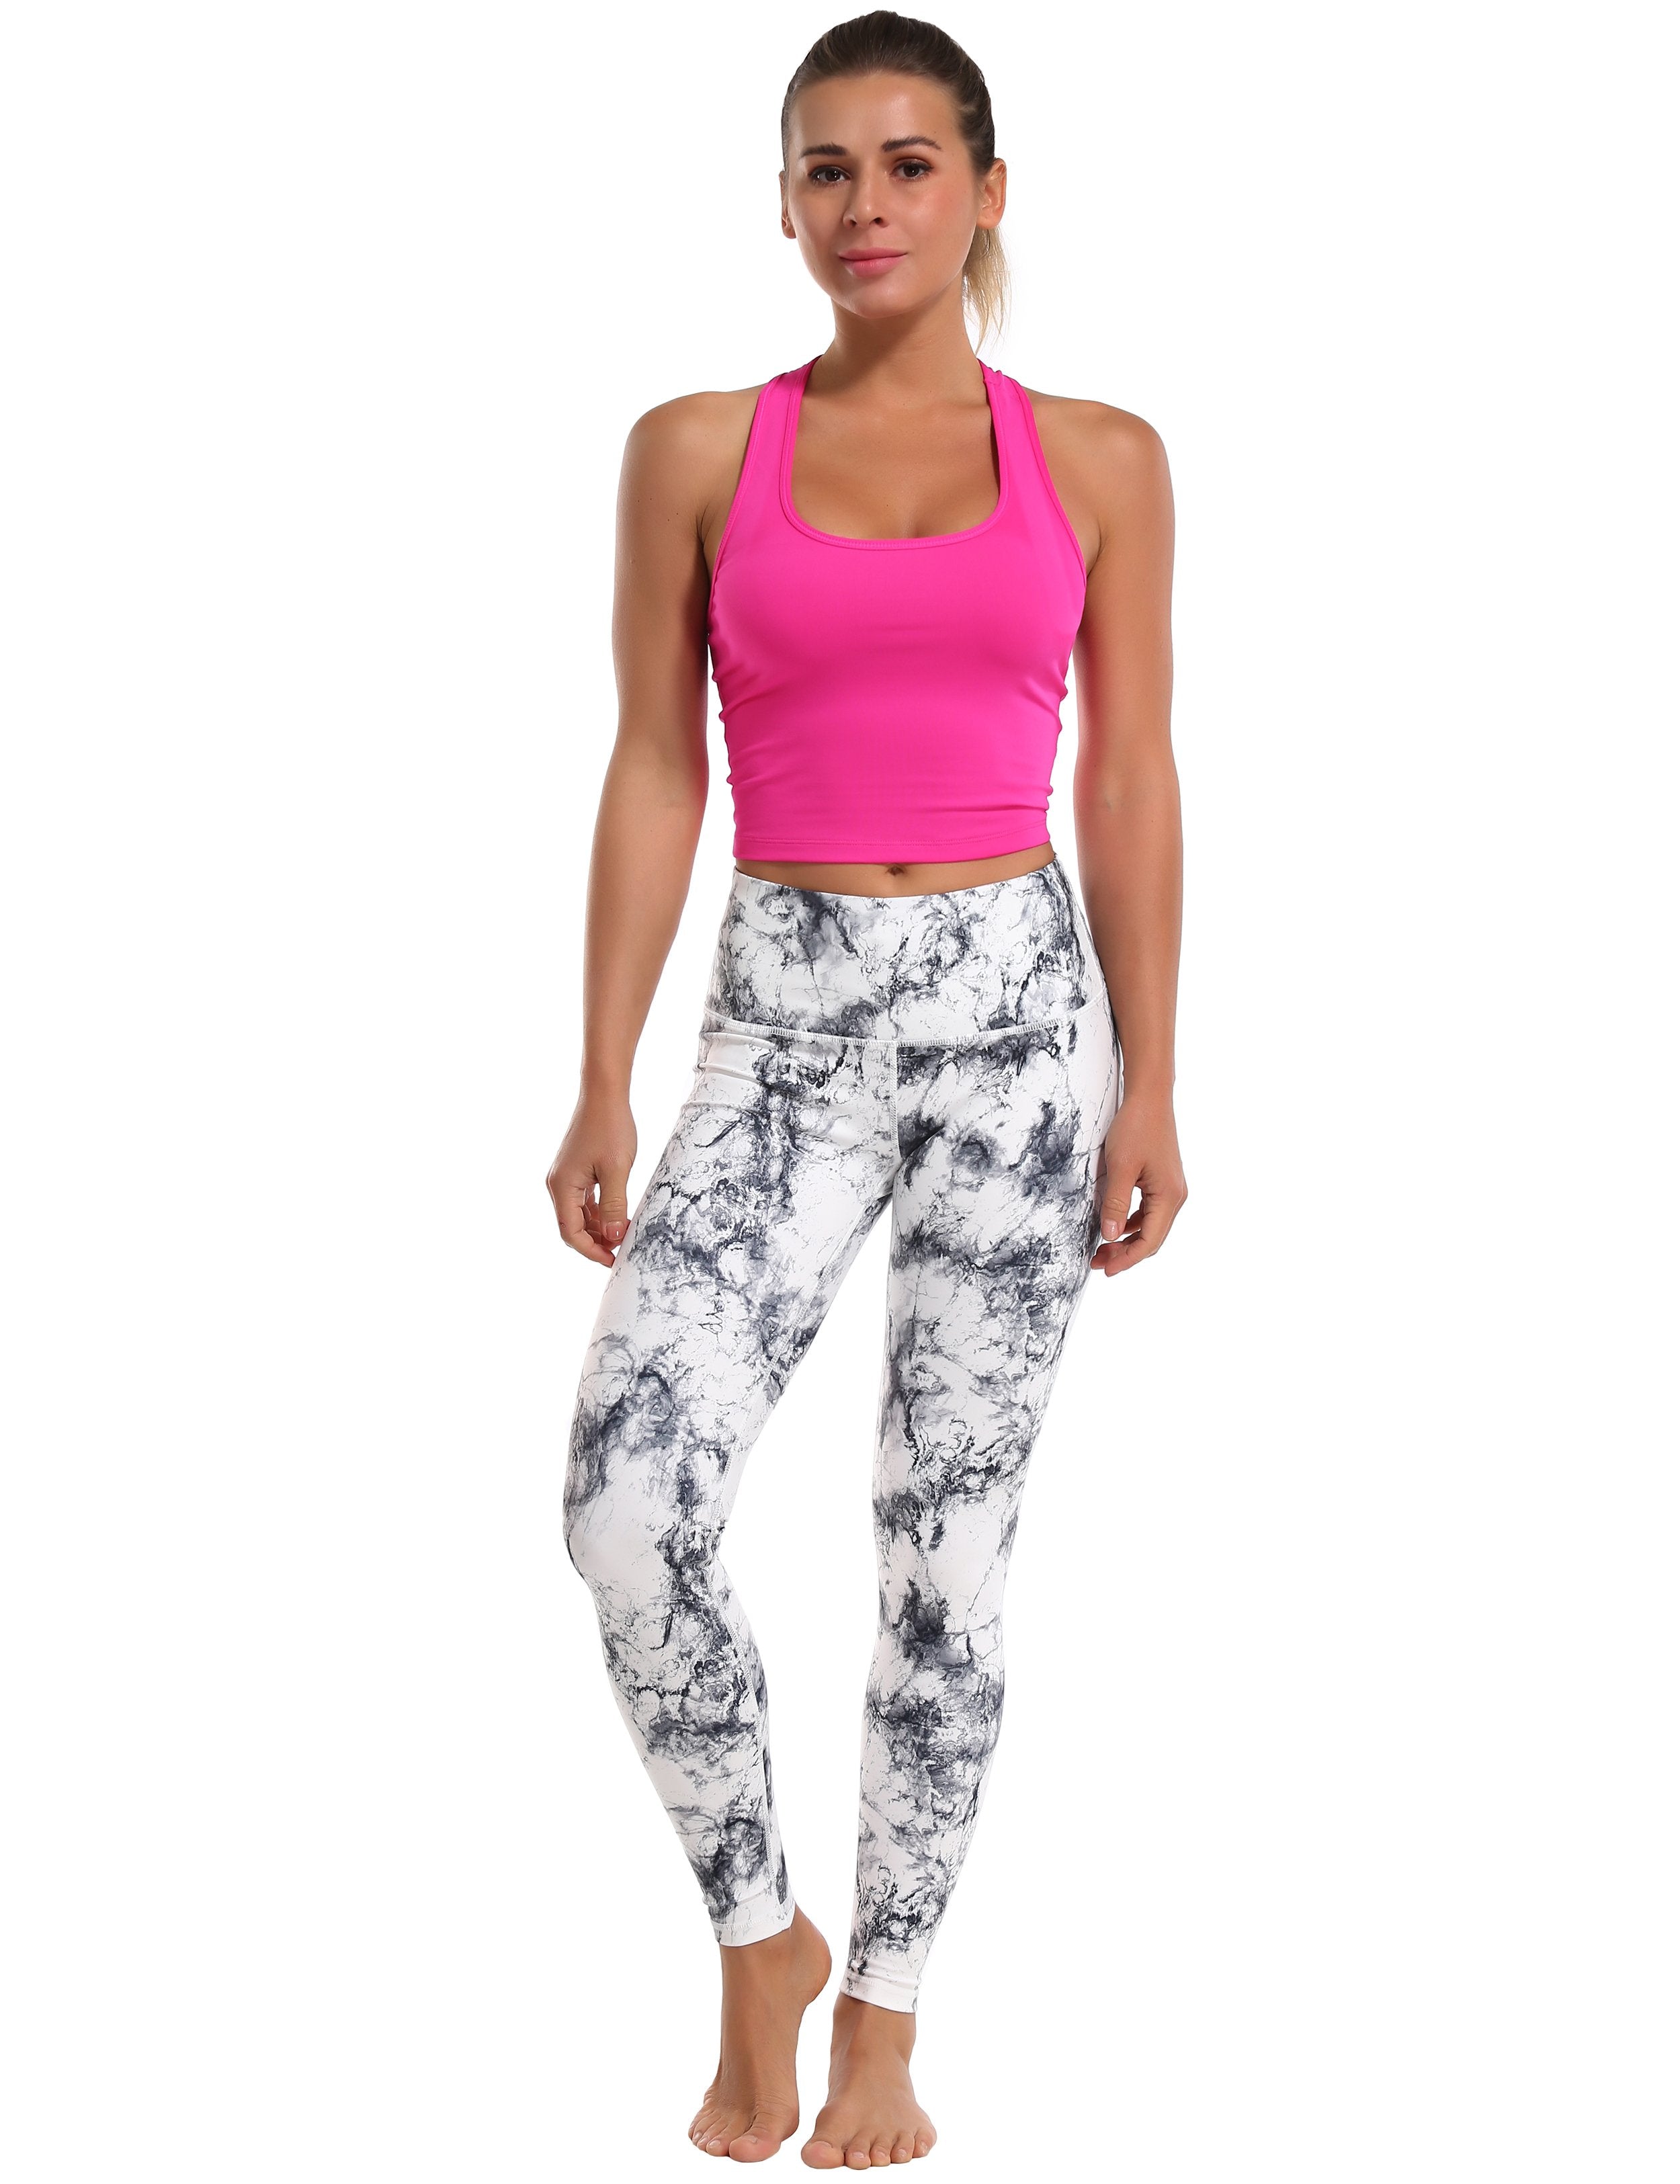 High Waist Running Pants arabescato 82%Polyester/18%Spandex Fabric doesn't attract lint easily 4-way stretch No see-through Moisture-wicking Tummy control Inner pocket